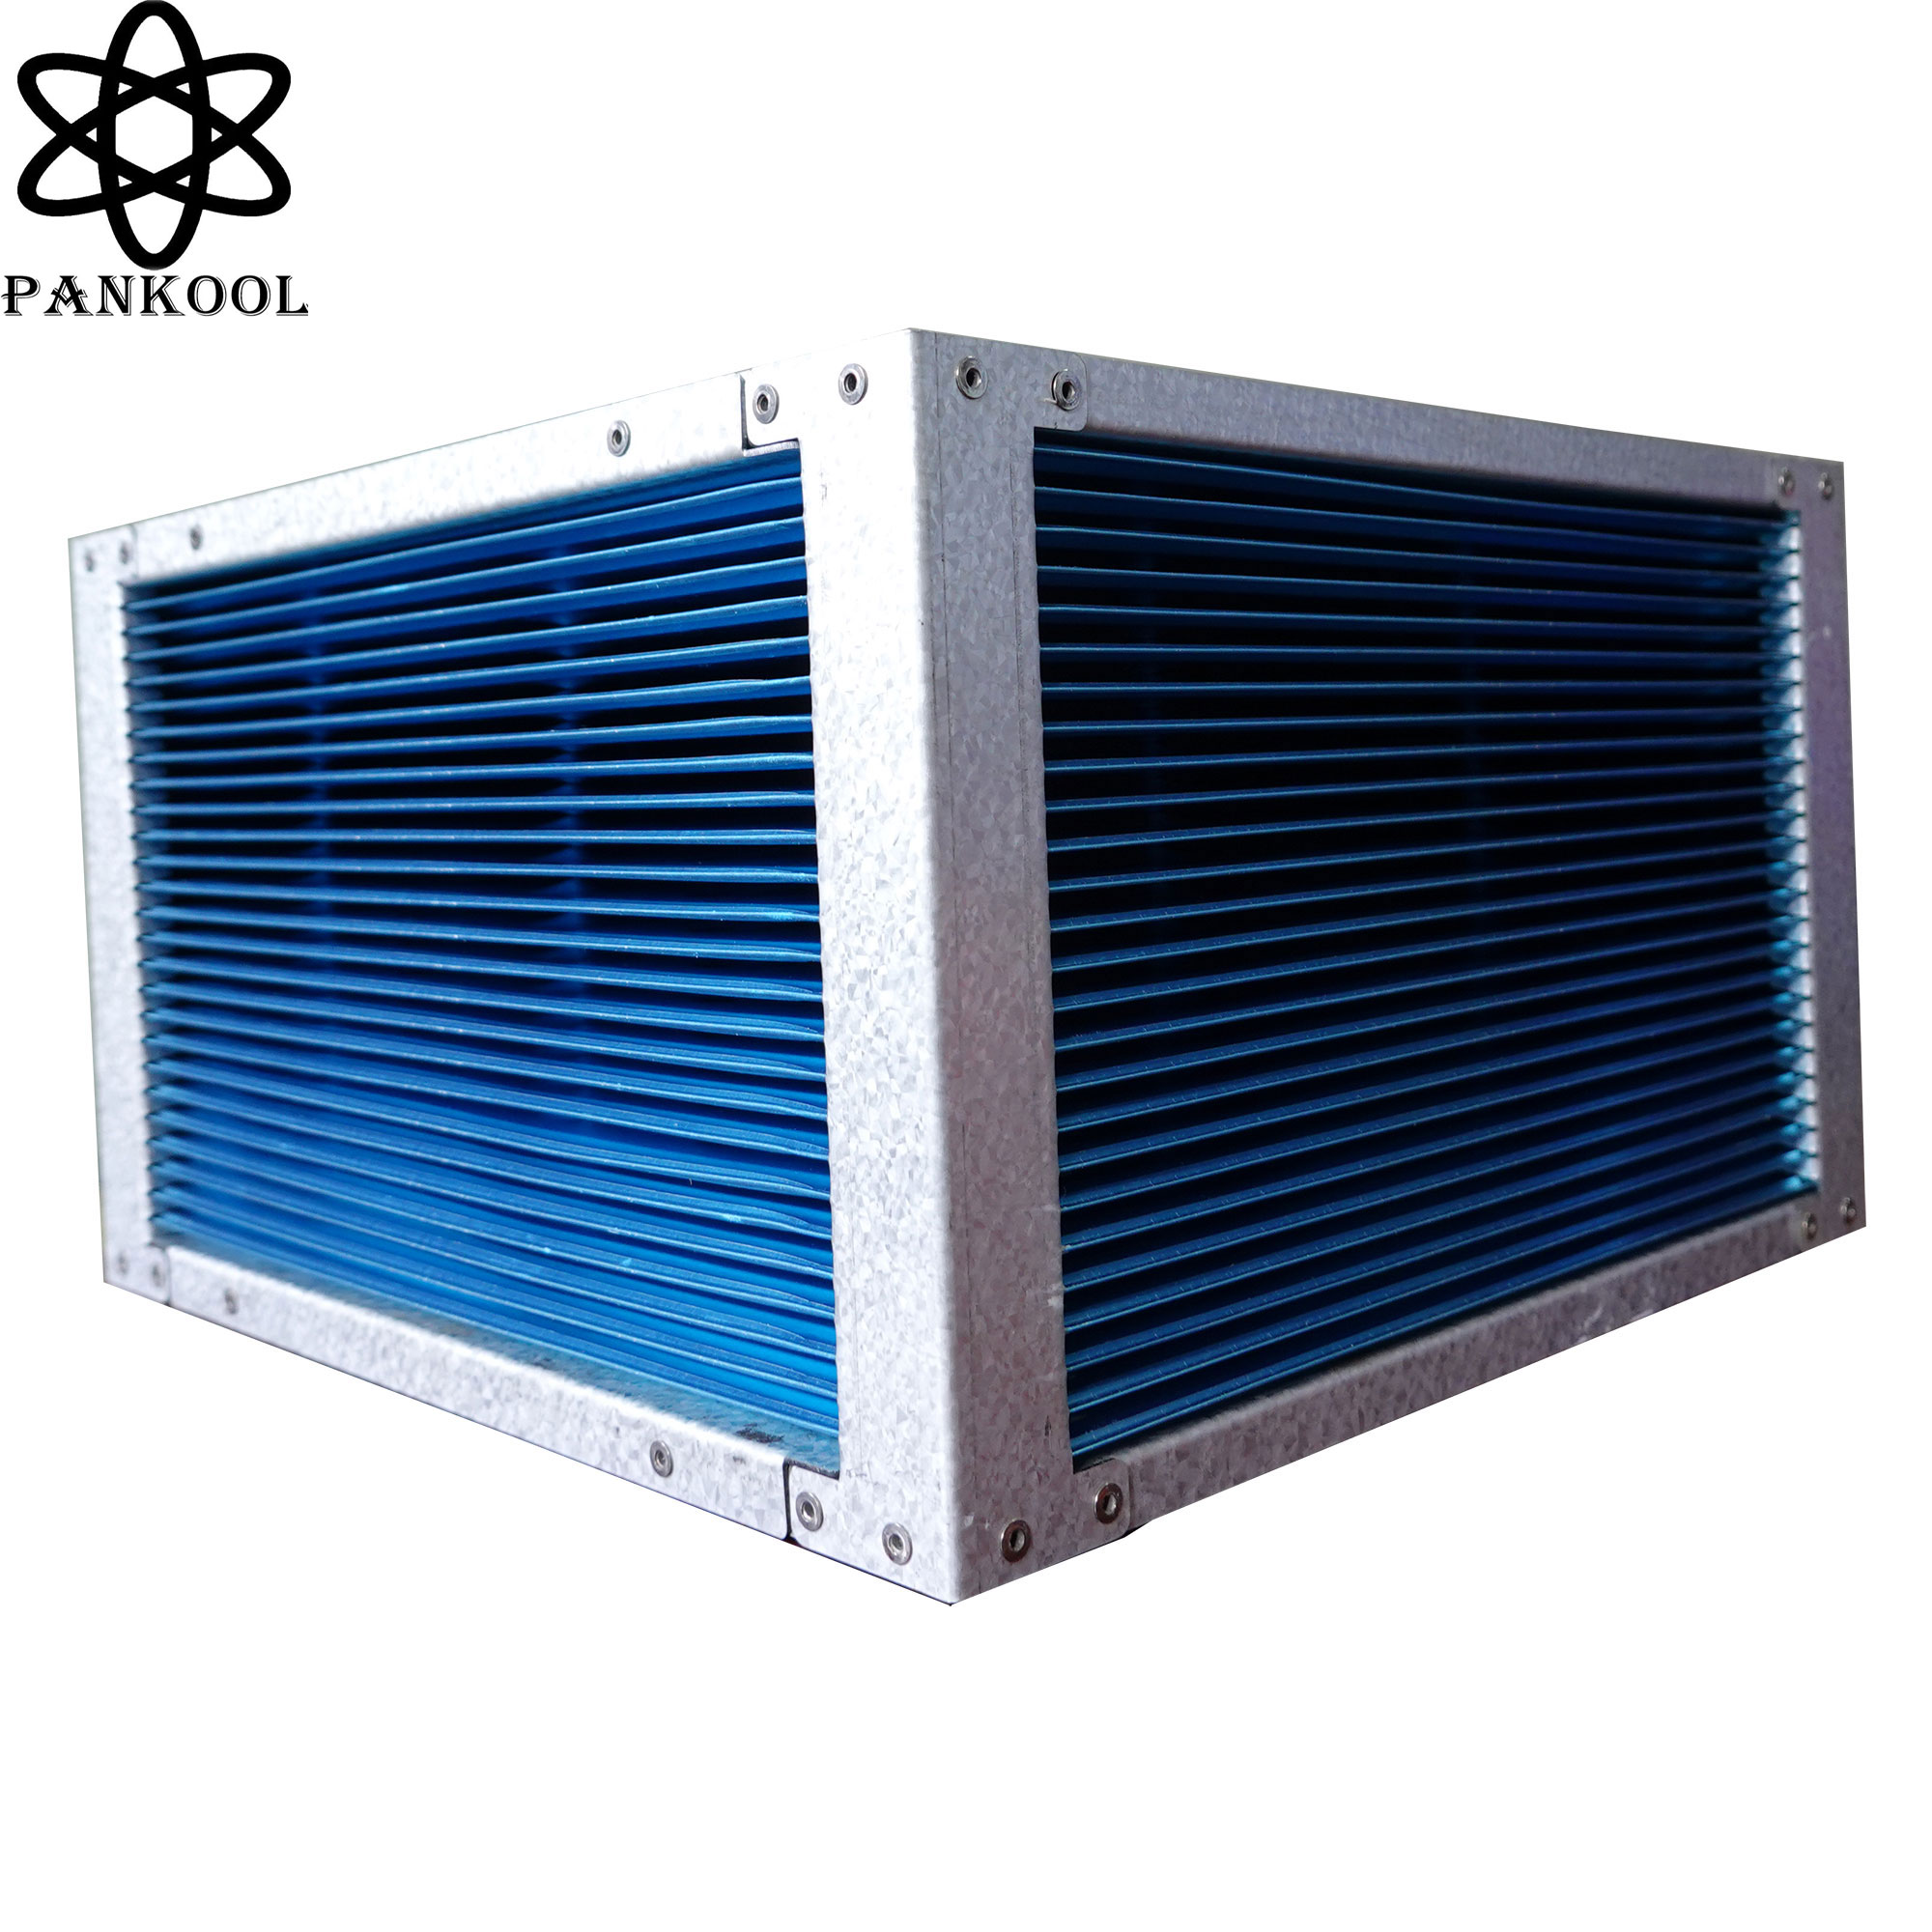 High-Quality Heat Recovery Air Exchanger Manufacturer, Supplier, Factory in China